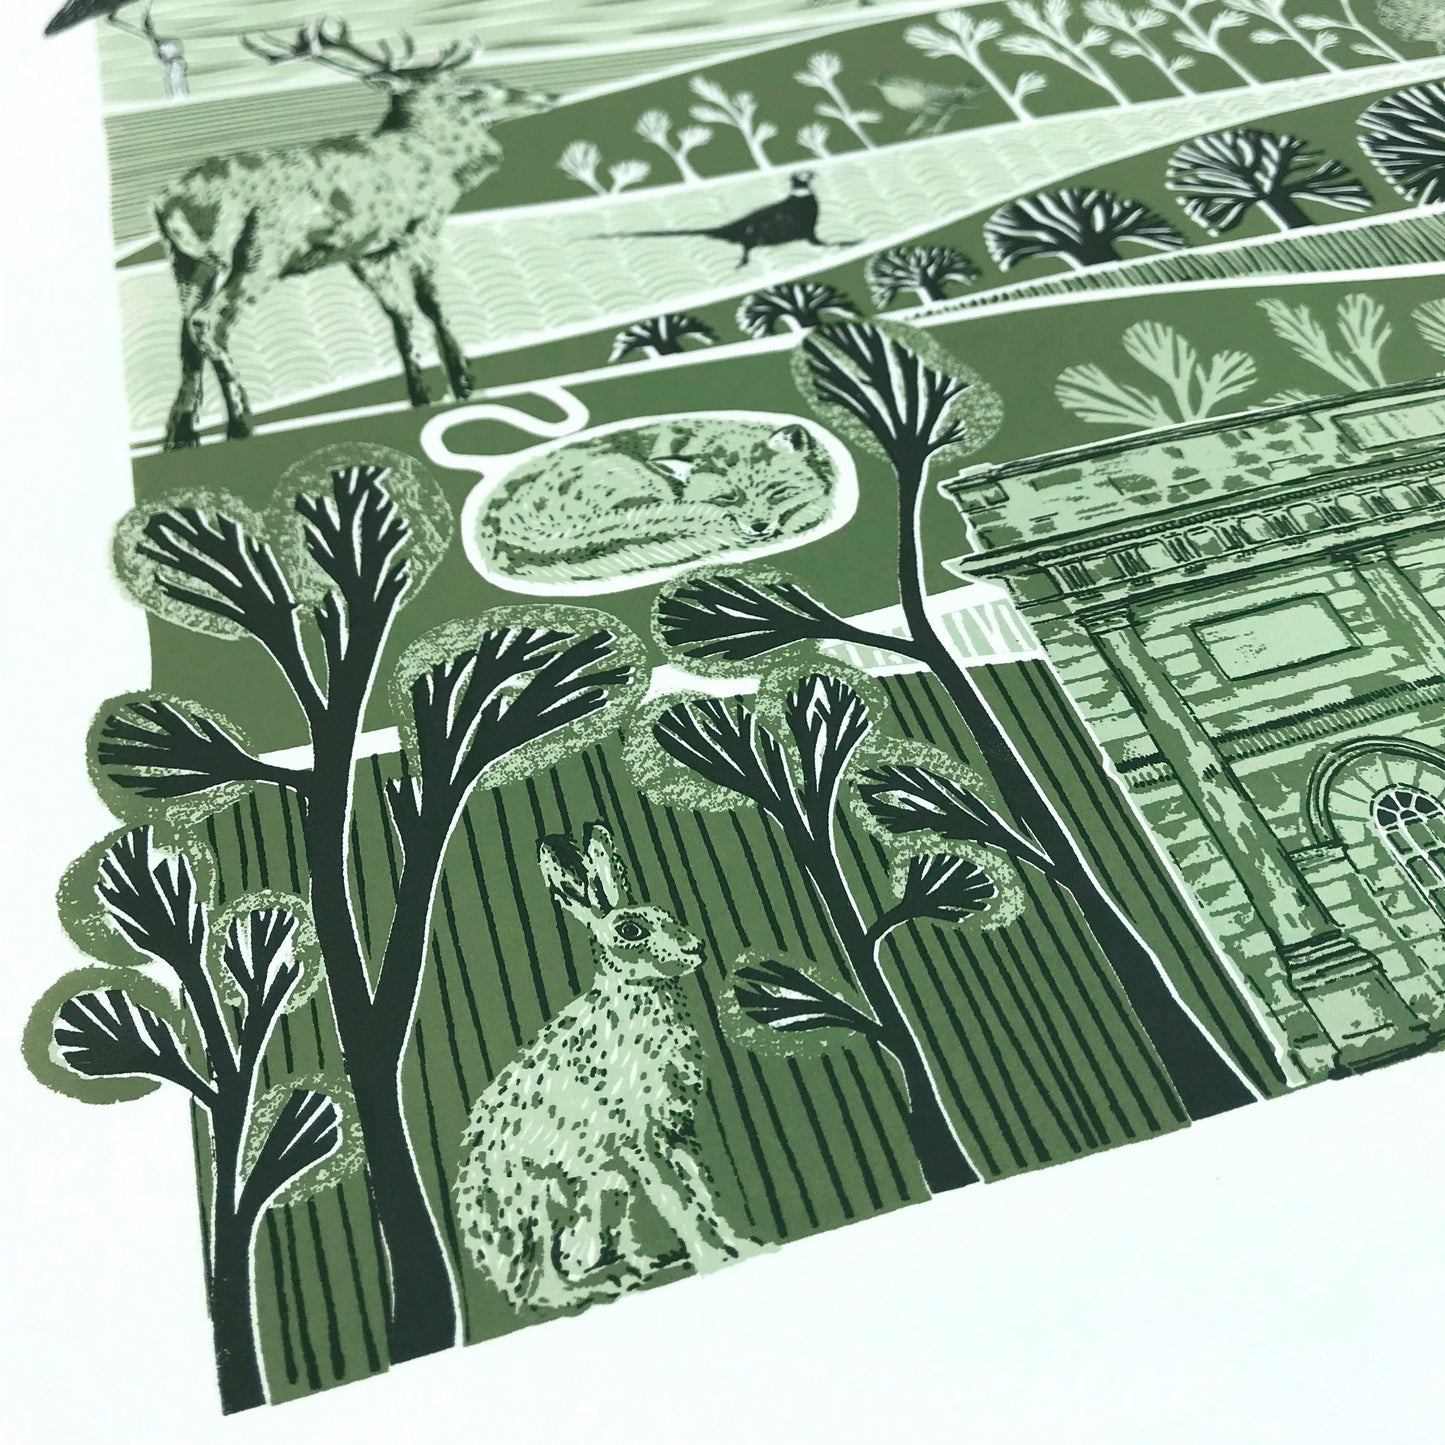 Folded Forest Harewood House Giclee Print - A4